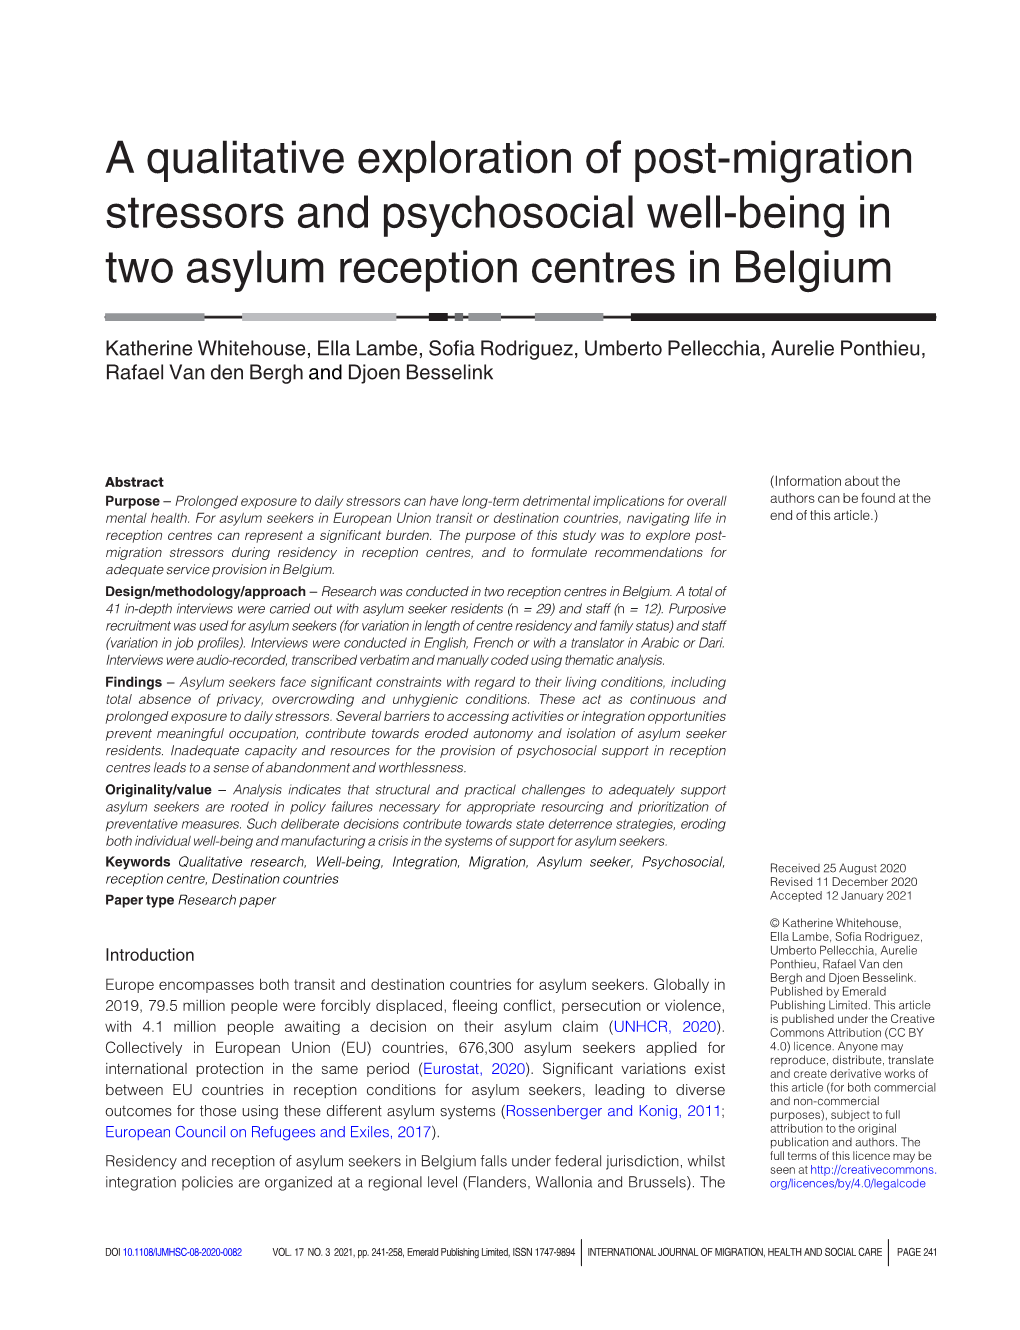 A Qualitative Exploration of Post-Migration Stressors and Psychosocial Well-Being in Two Asylum Reception Centres in Belgium